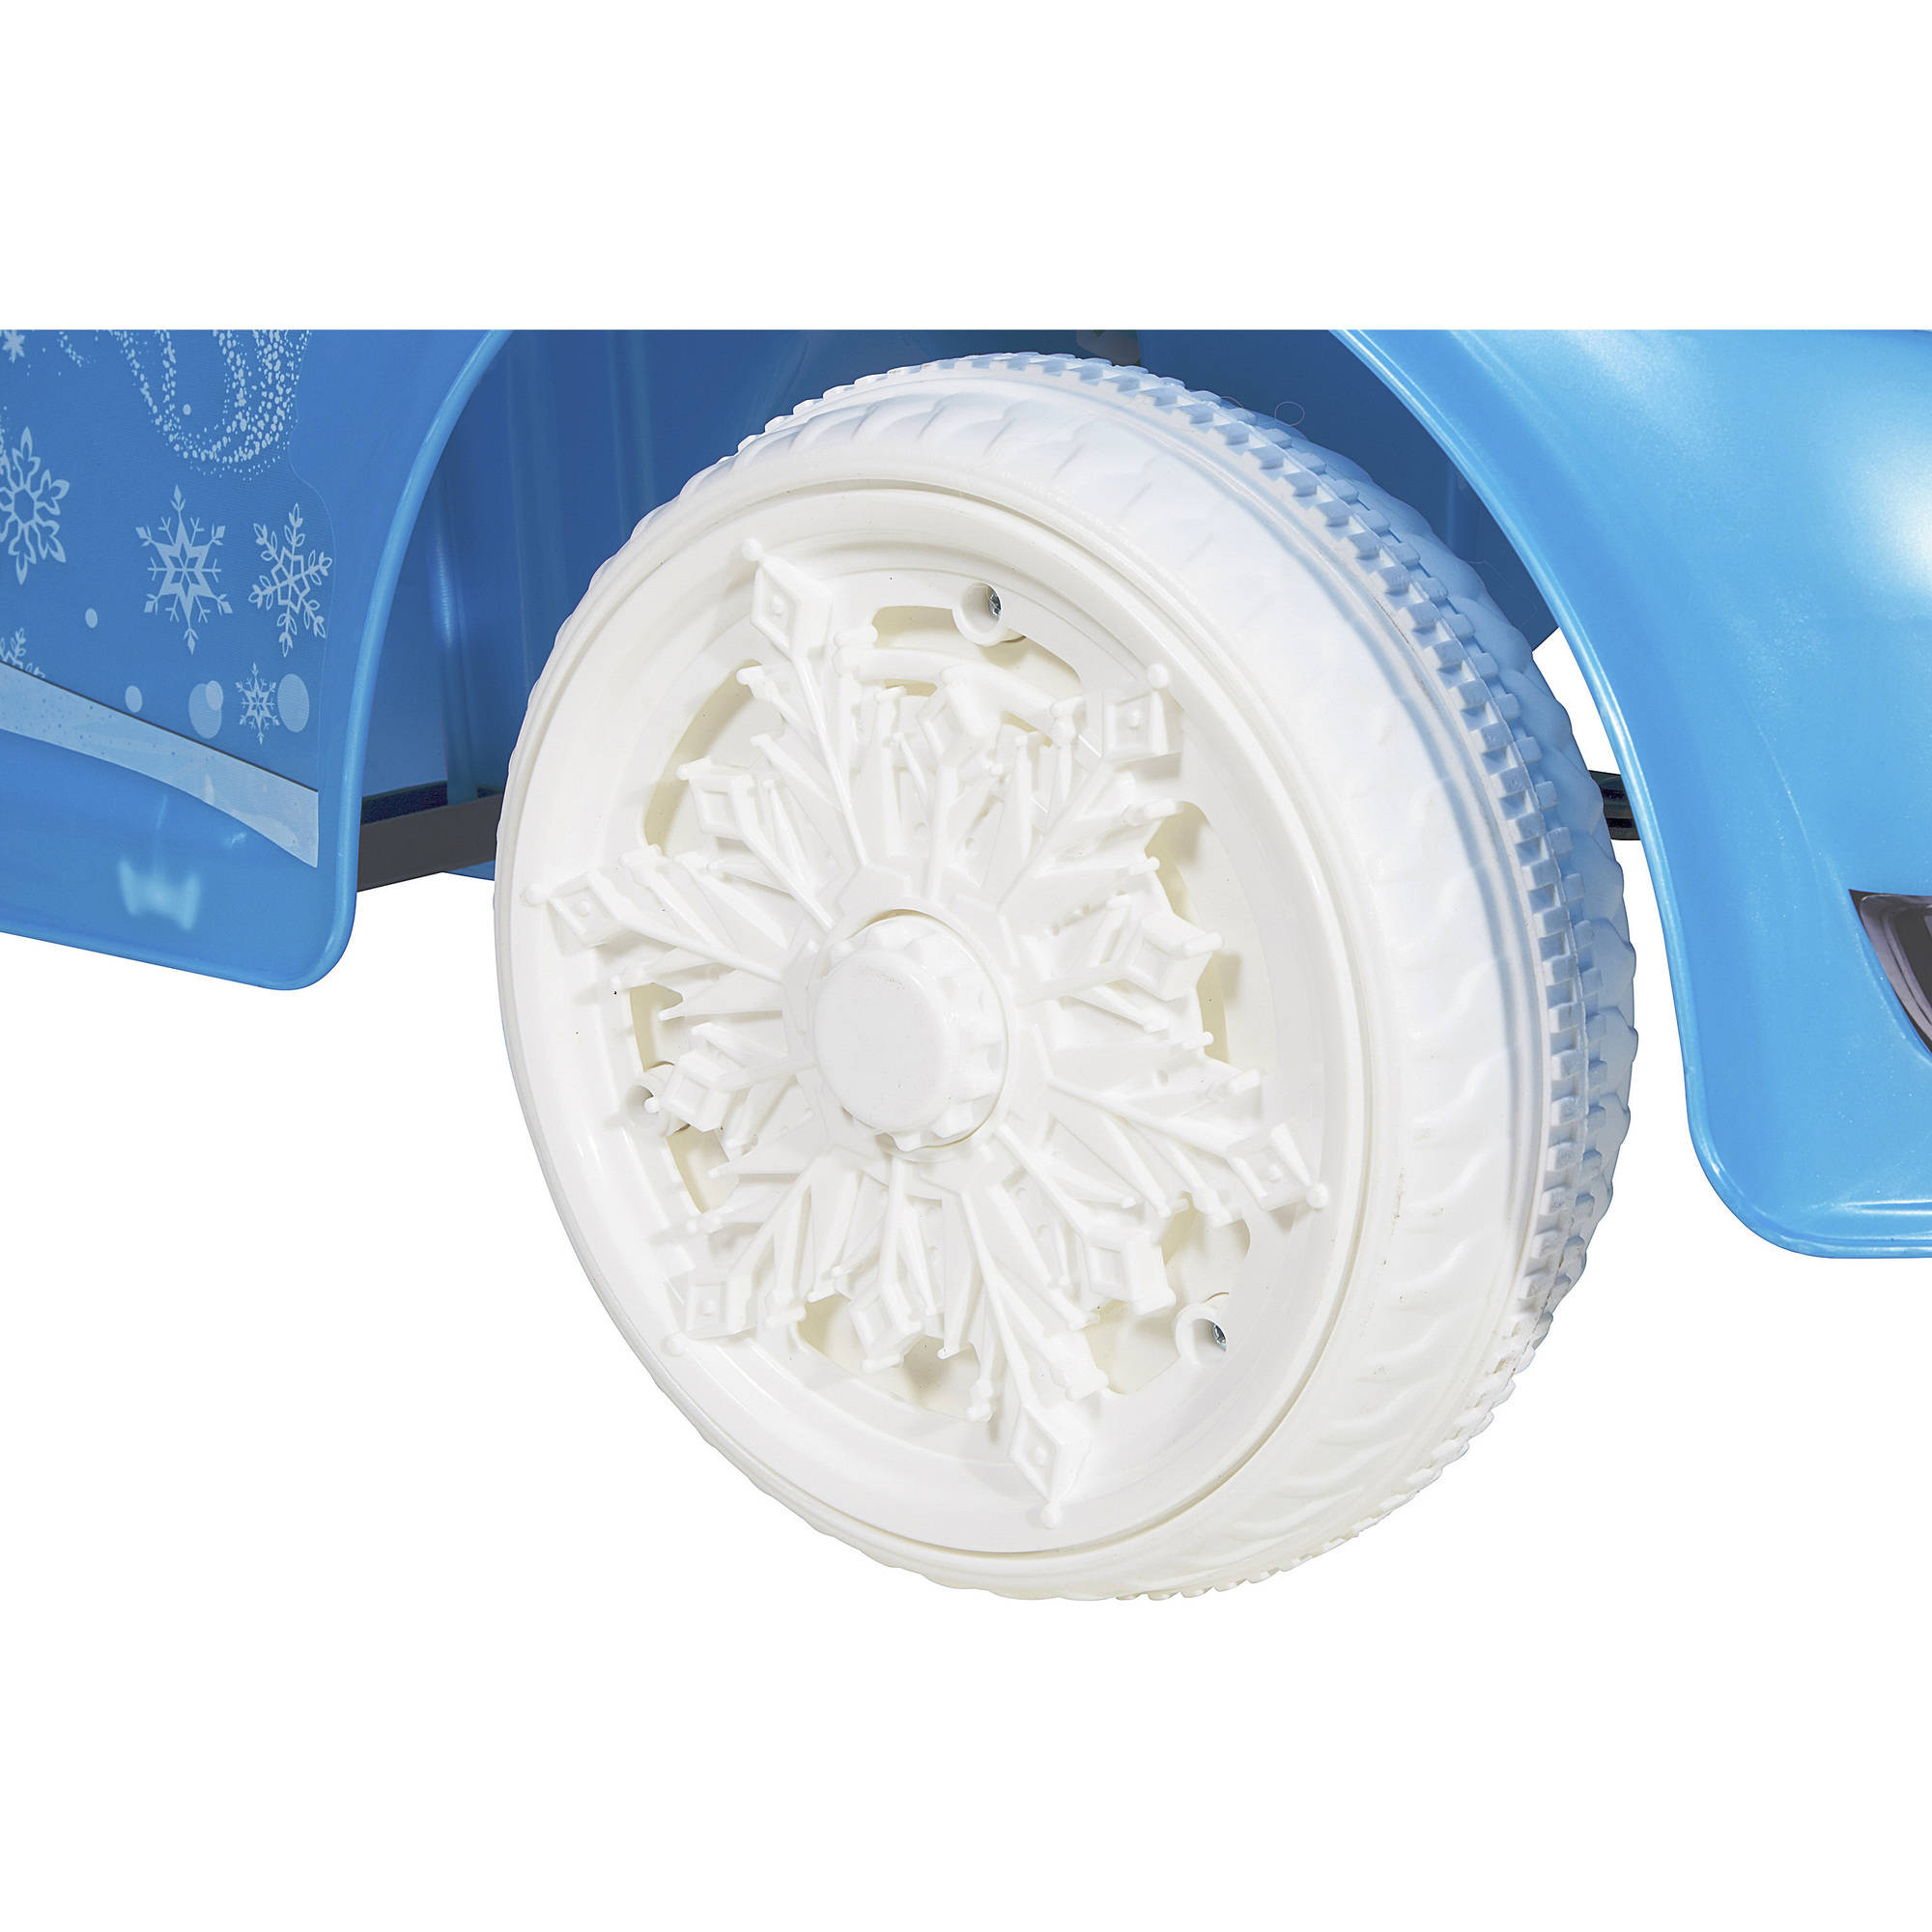 Disney Frozen Speed Coupe 6-Volt Battery-Powered Ride-On - image 3 of 6